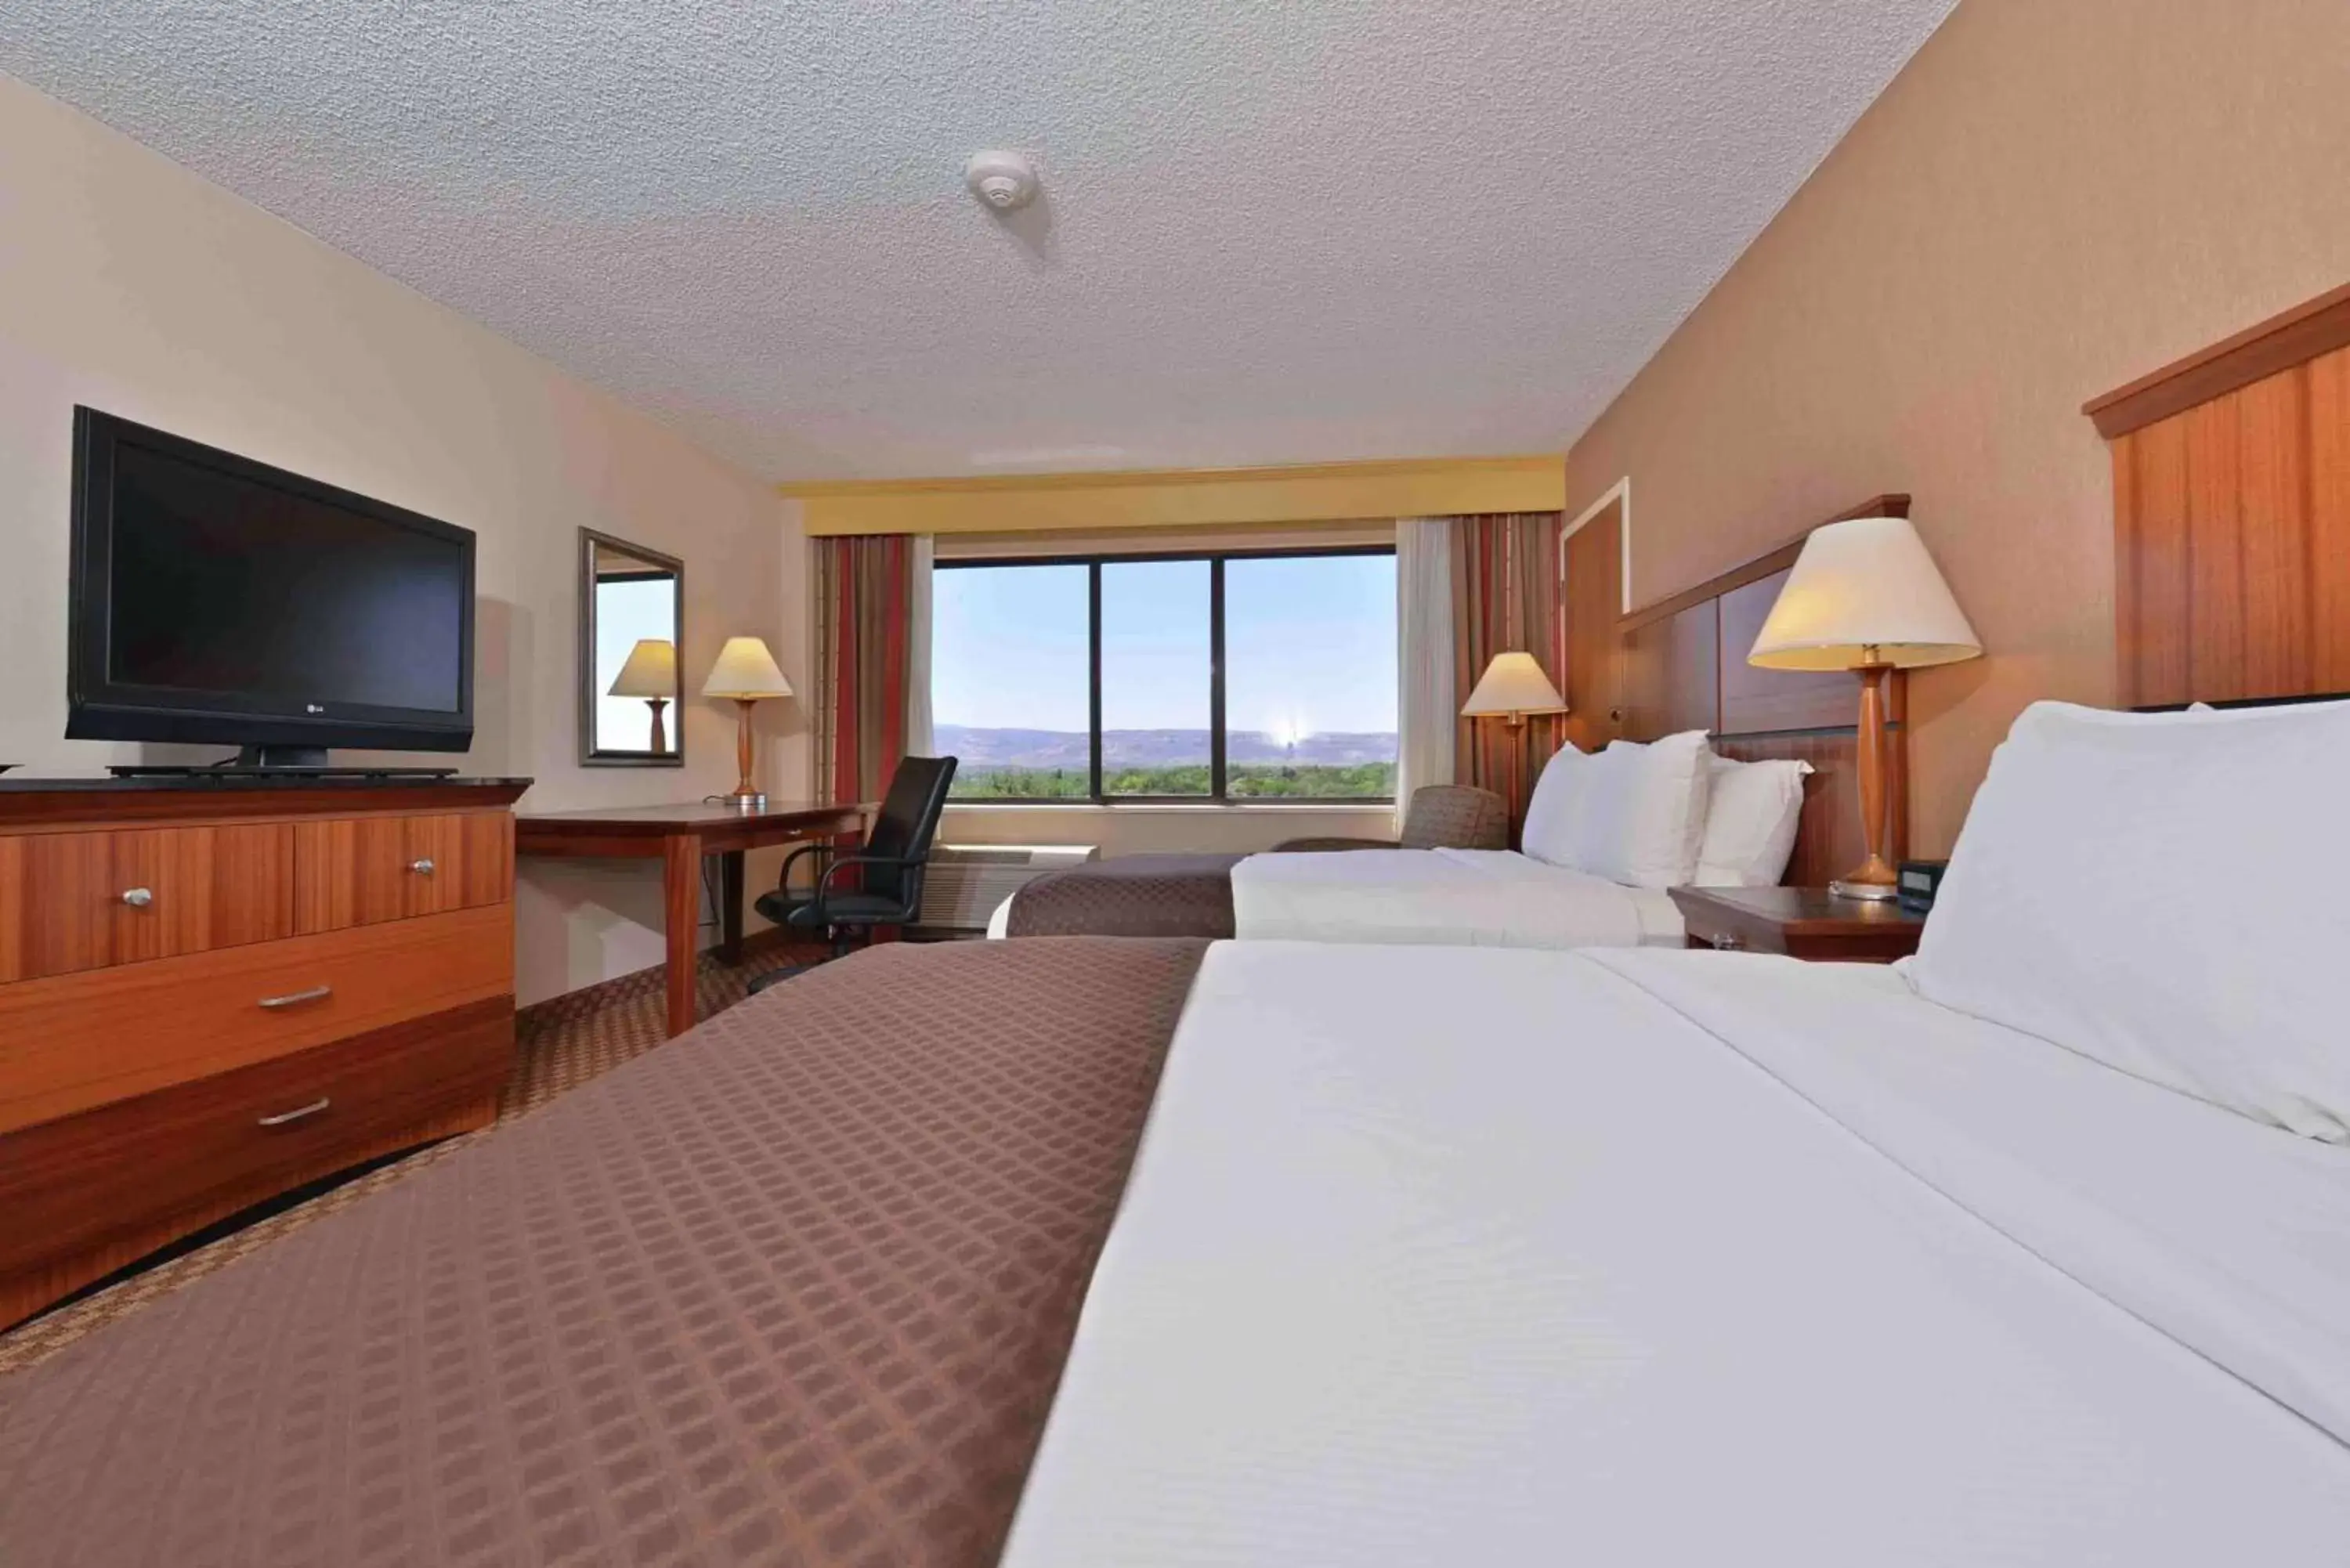 Bedroom in DoubleTree by Hilton Grand Junction